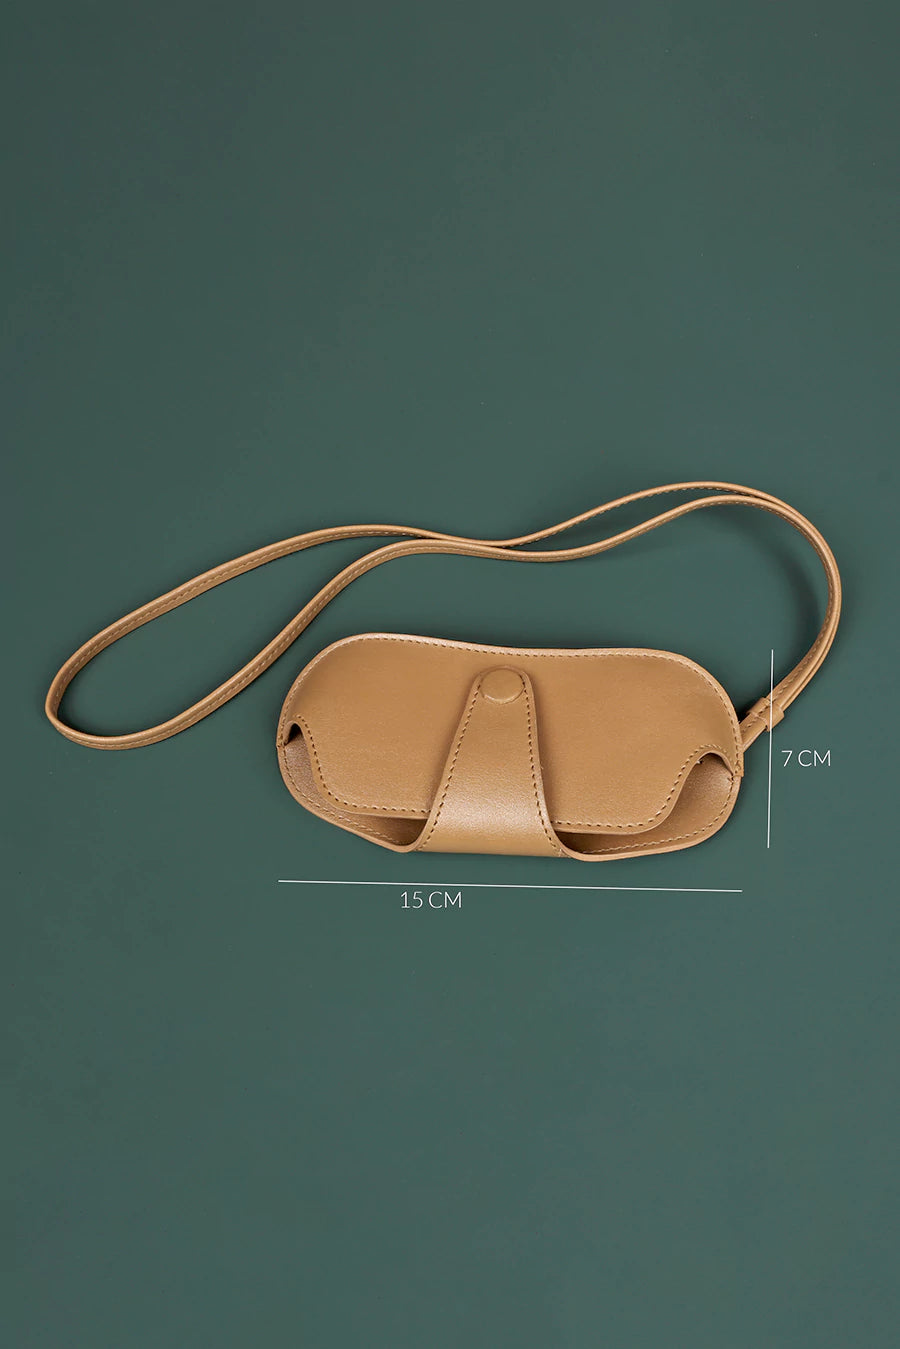 Vegan sunglass cover/case with sling champagne measurement